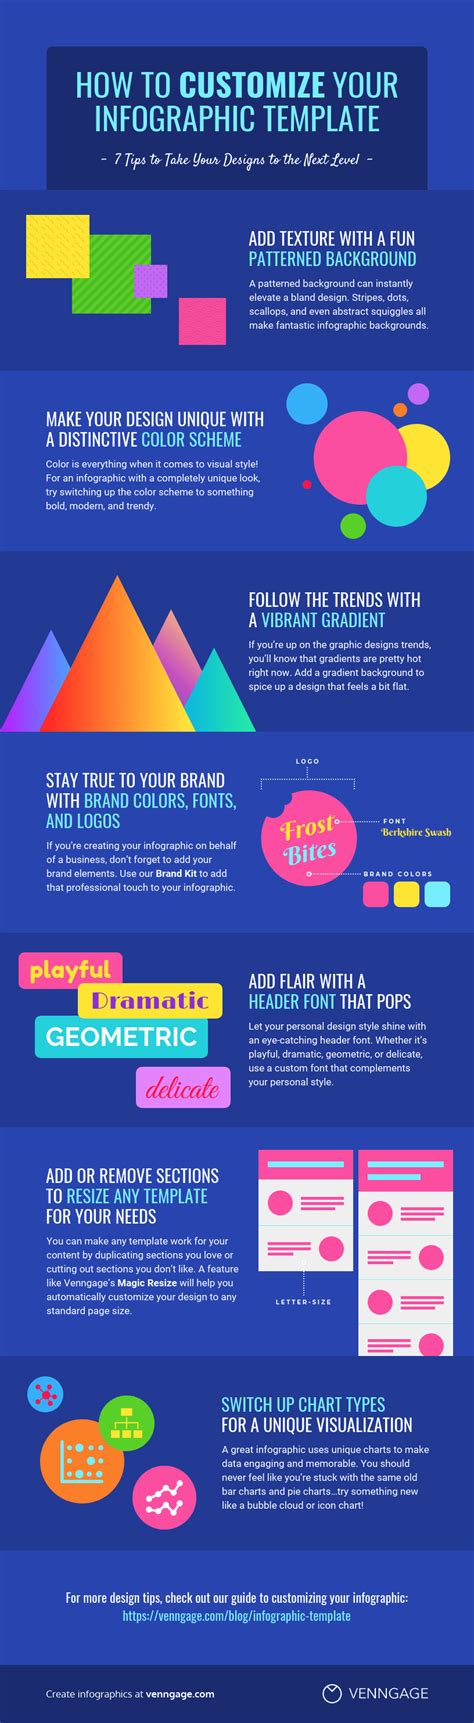 How To Customize Your Infographic Template Venngage